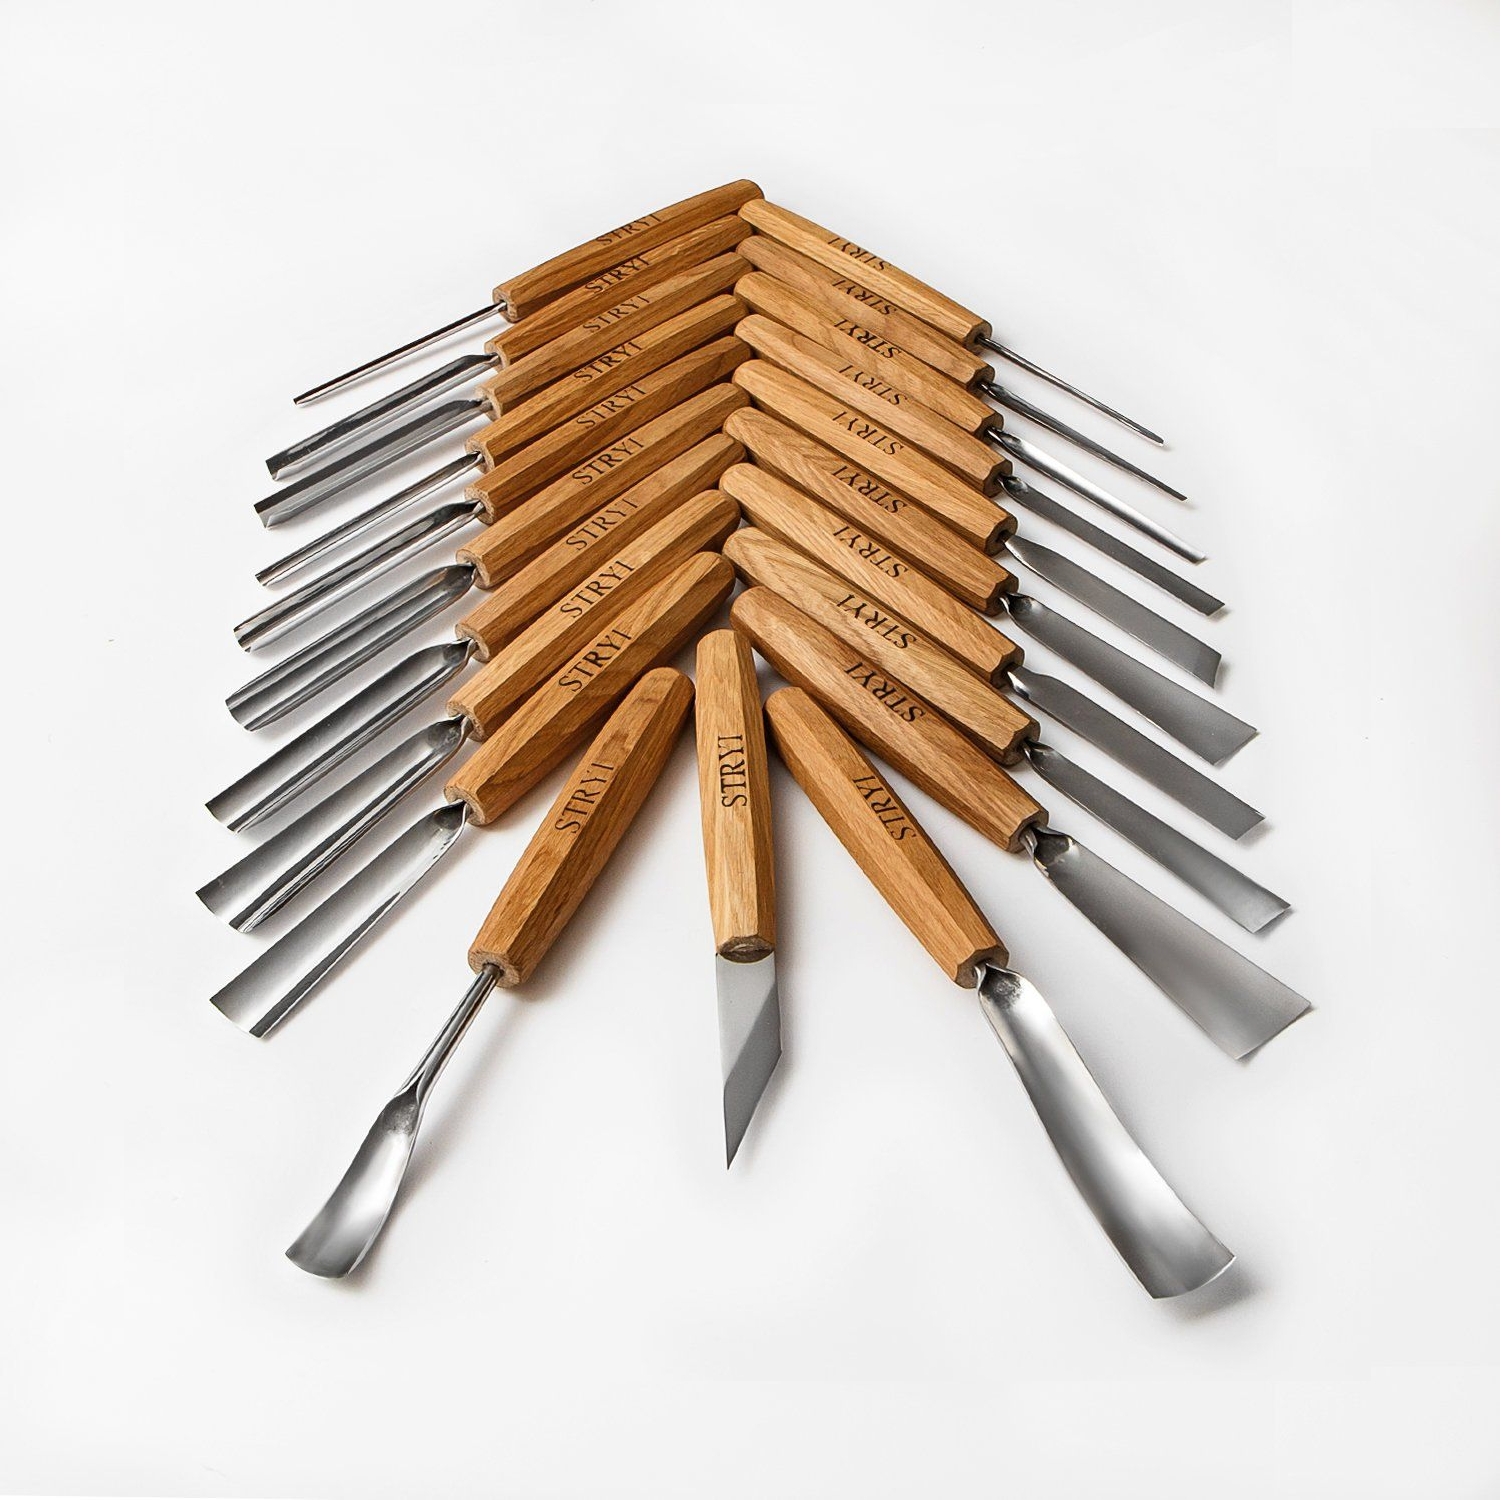 Wood Carving Tools Set For Relief Carving 21 pcs, Wood Carving Knife Set